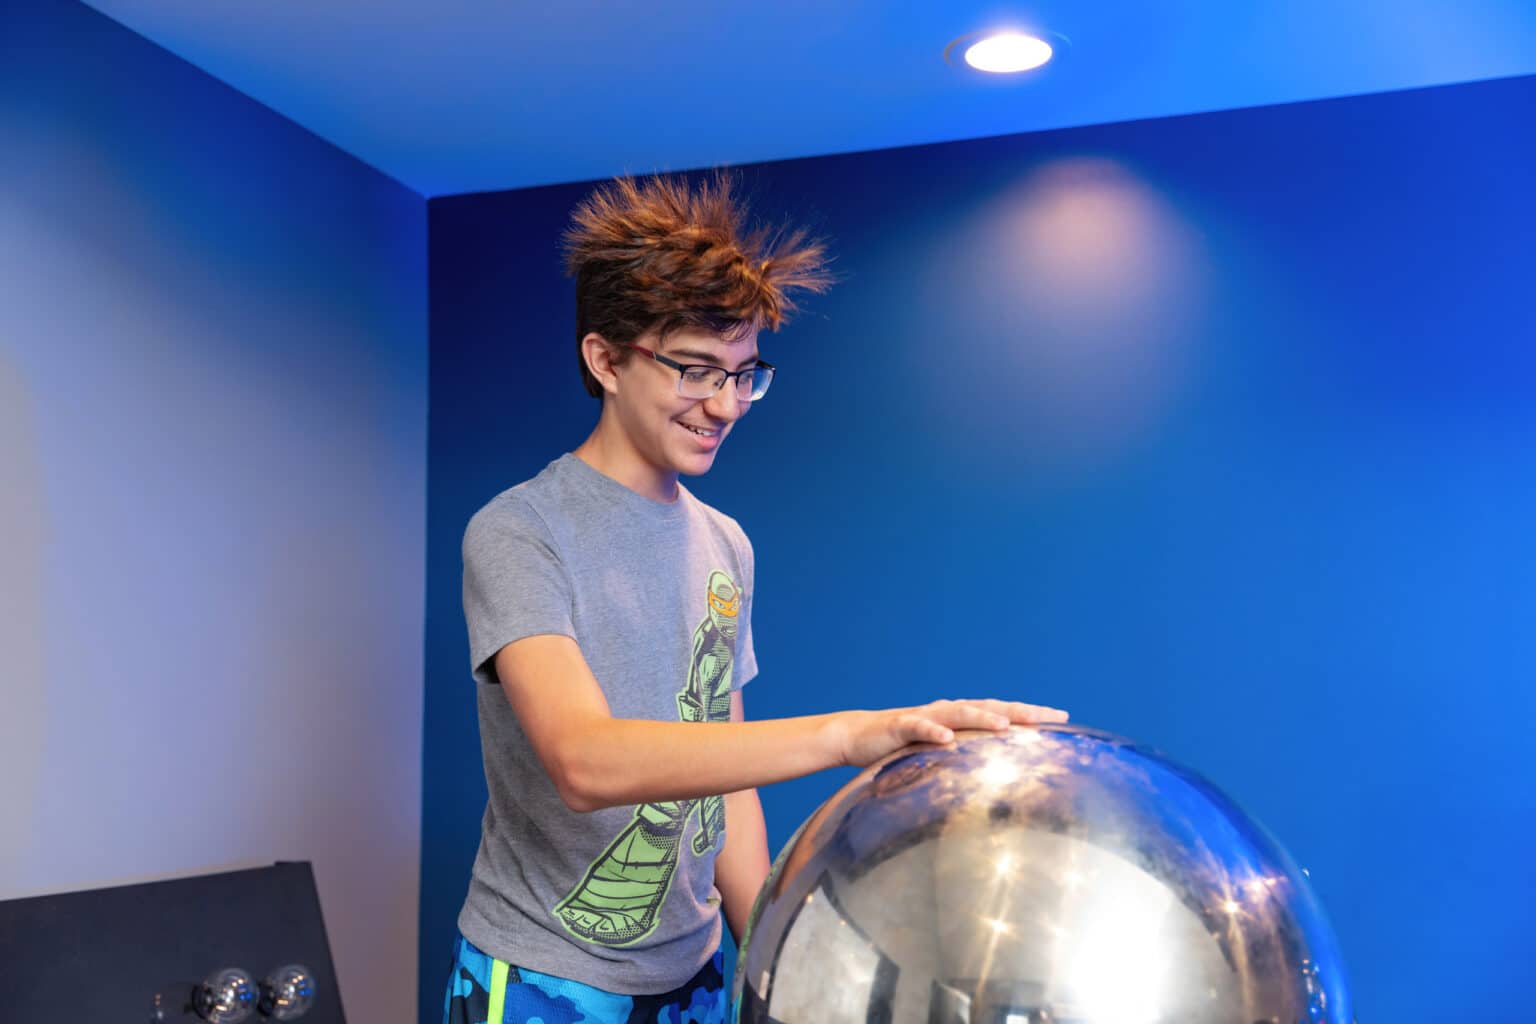 Boy smiling while touching static.